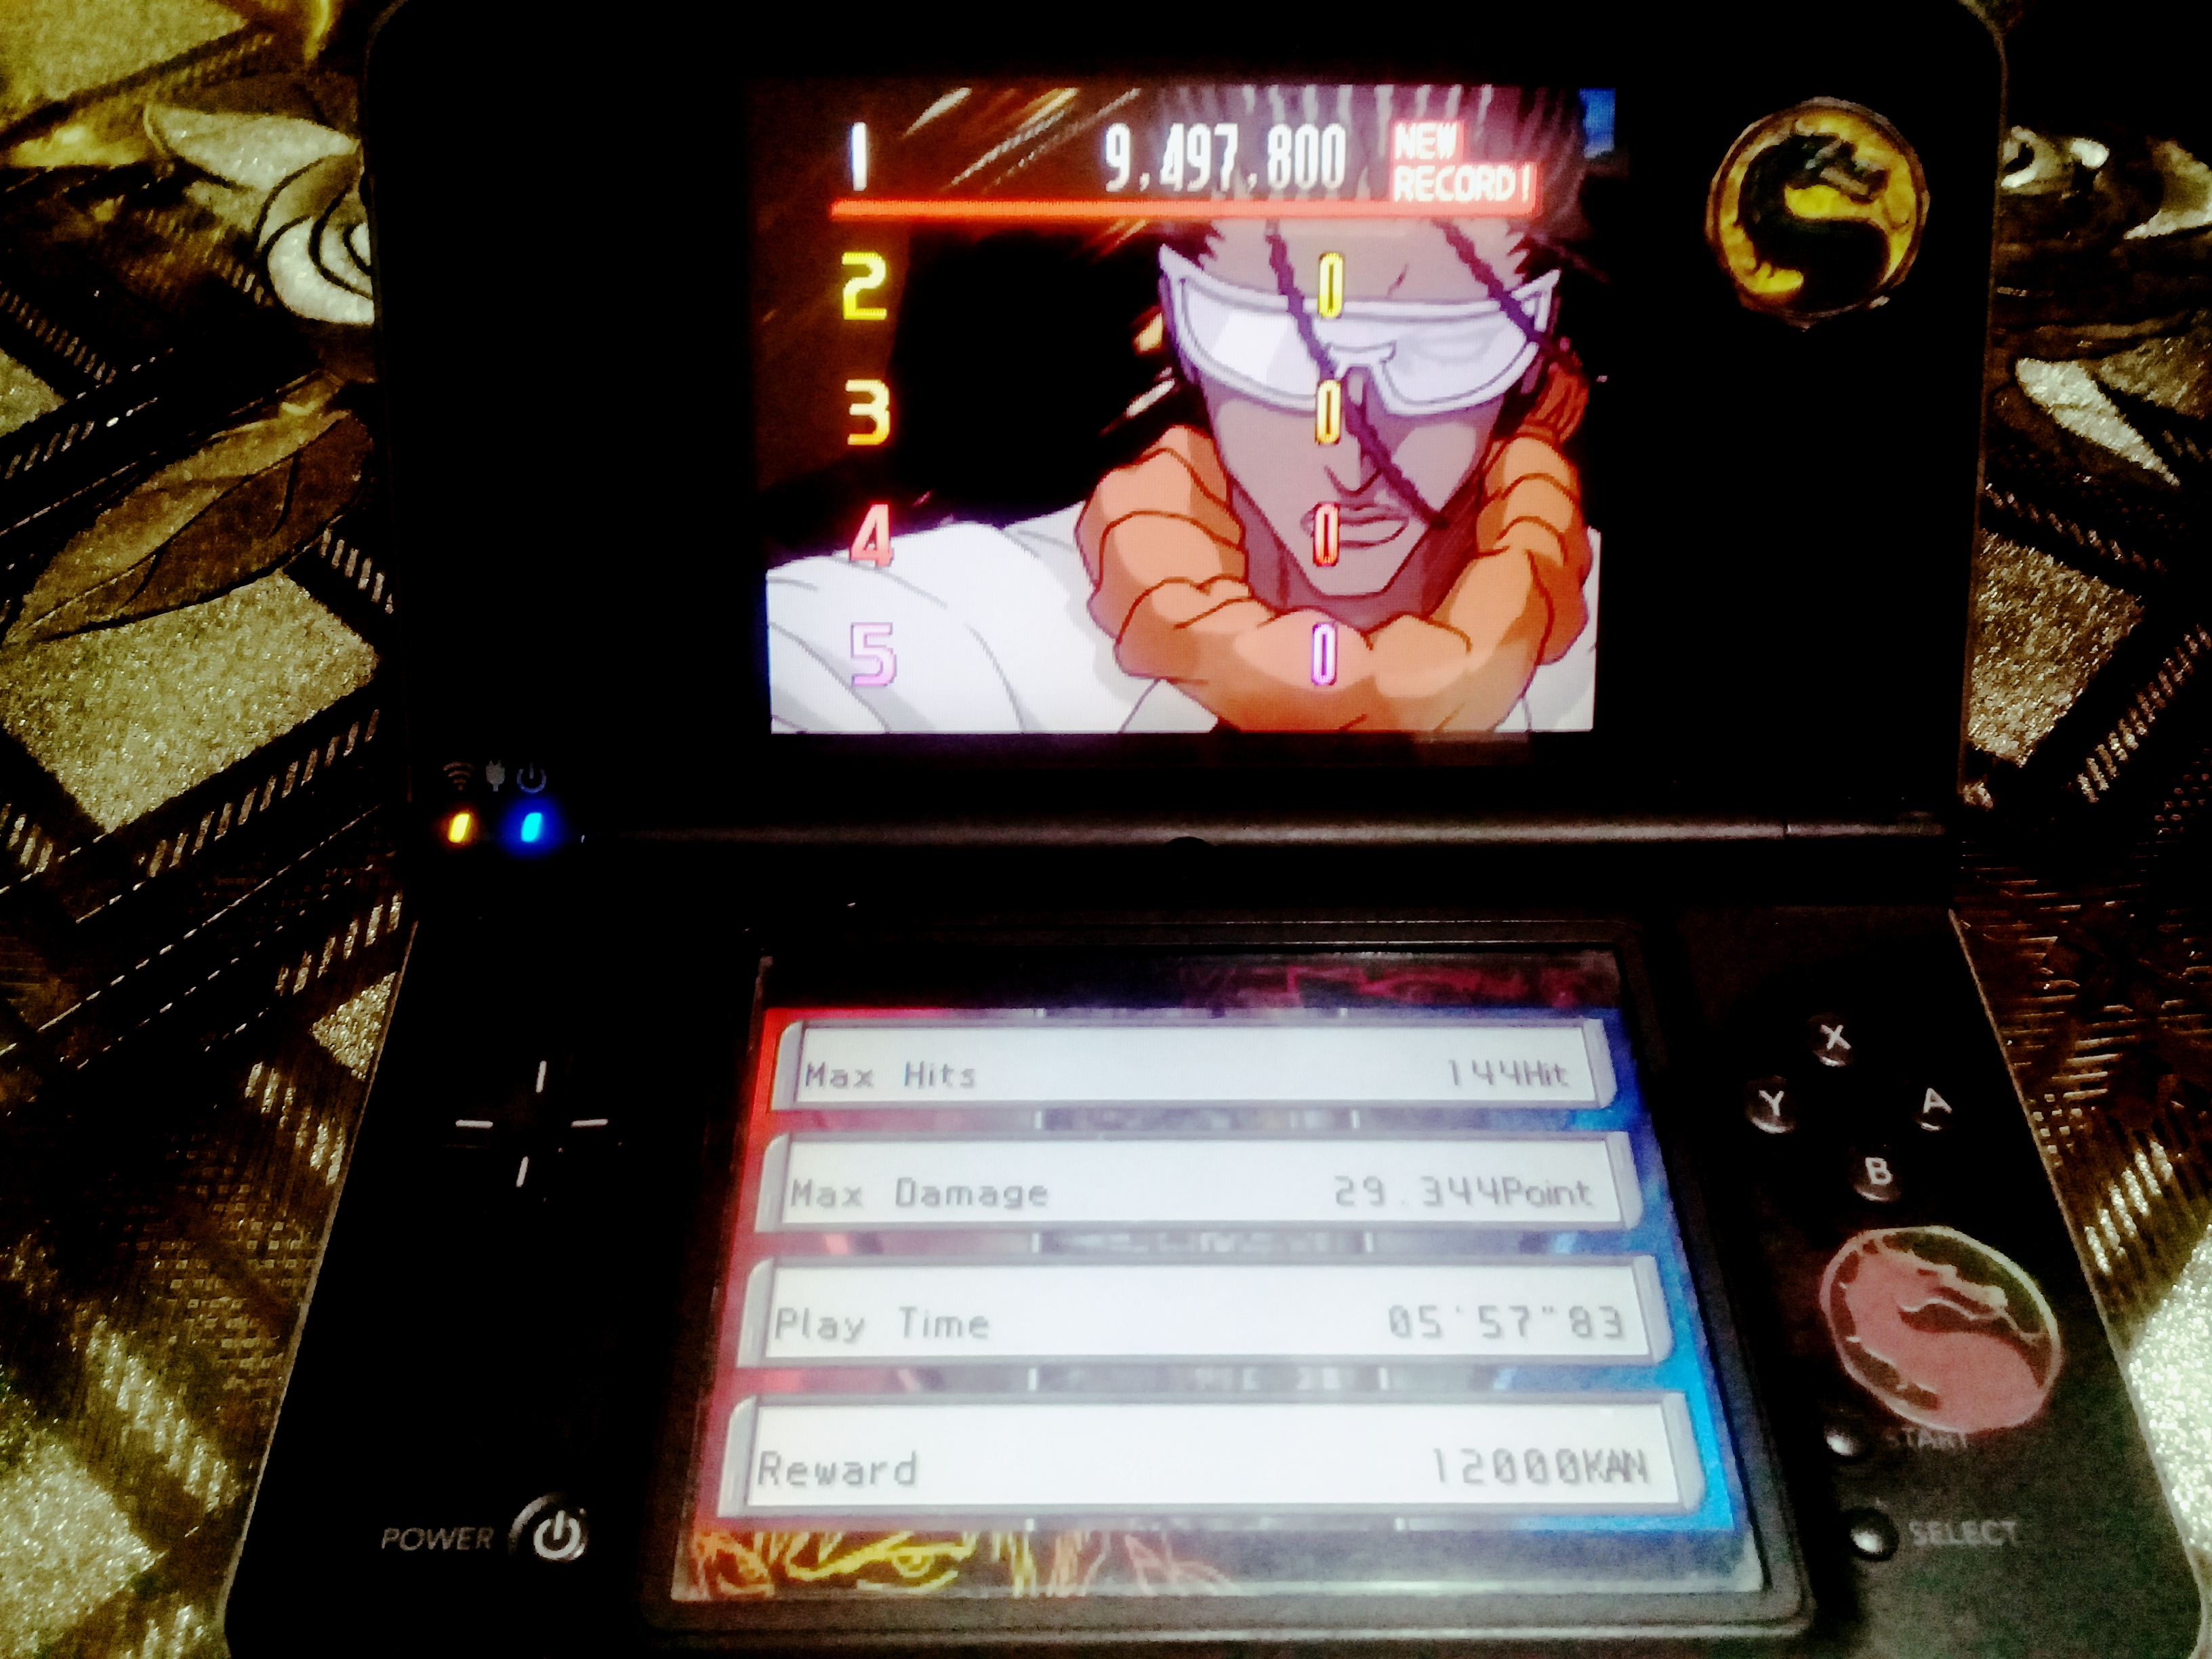 omargeddon: Bleach: The Blade Of Fate: Arcade Mode: Tosen [Easy] (Nintendo DS) 9,497,800 points on 2020-10-13 11:47:13